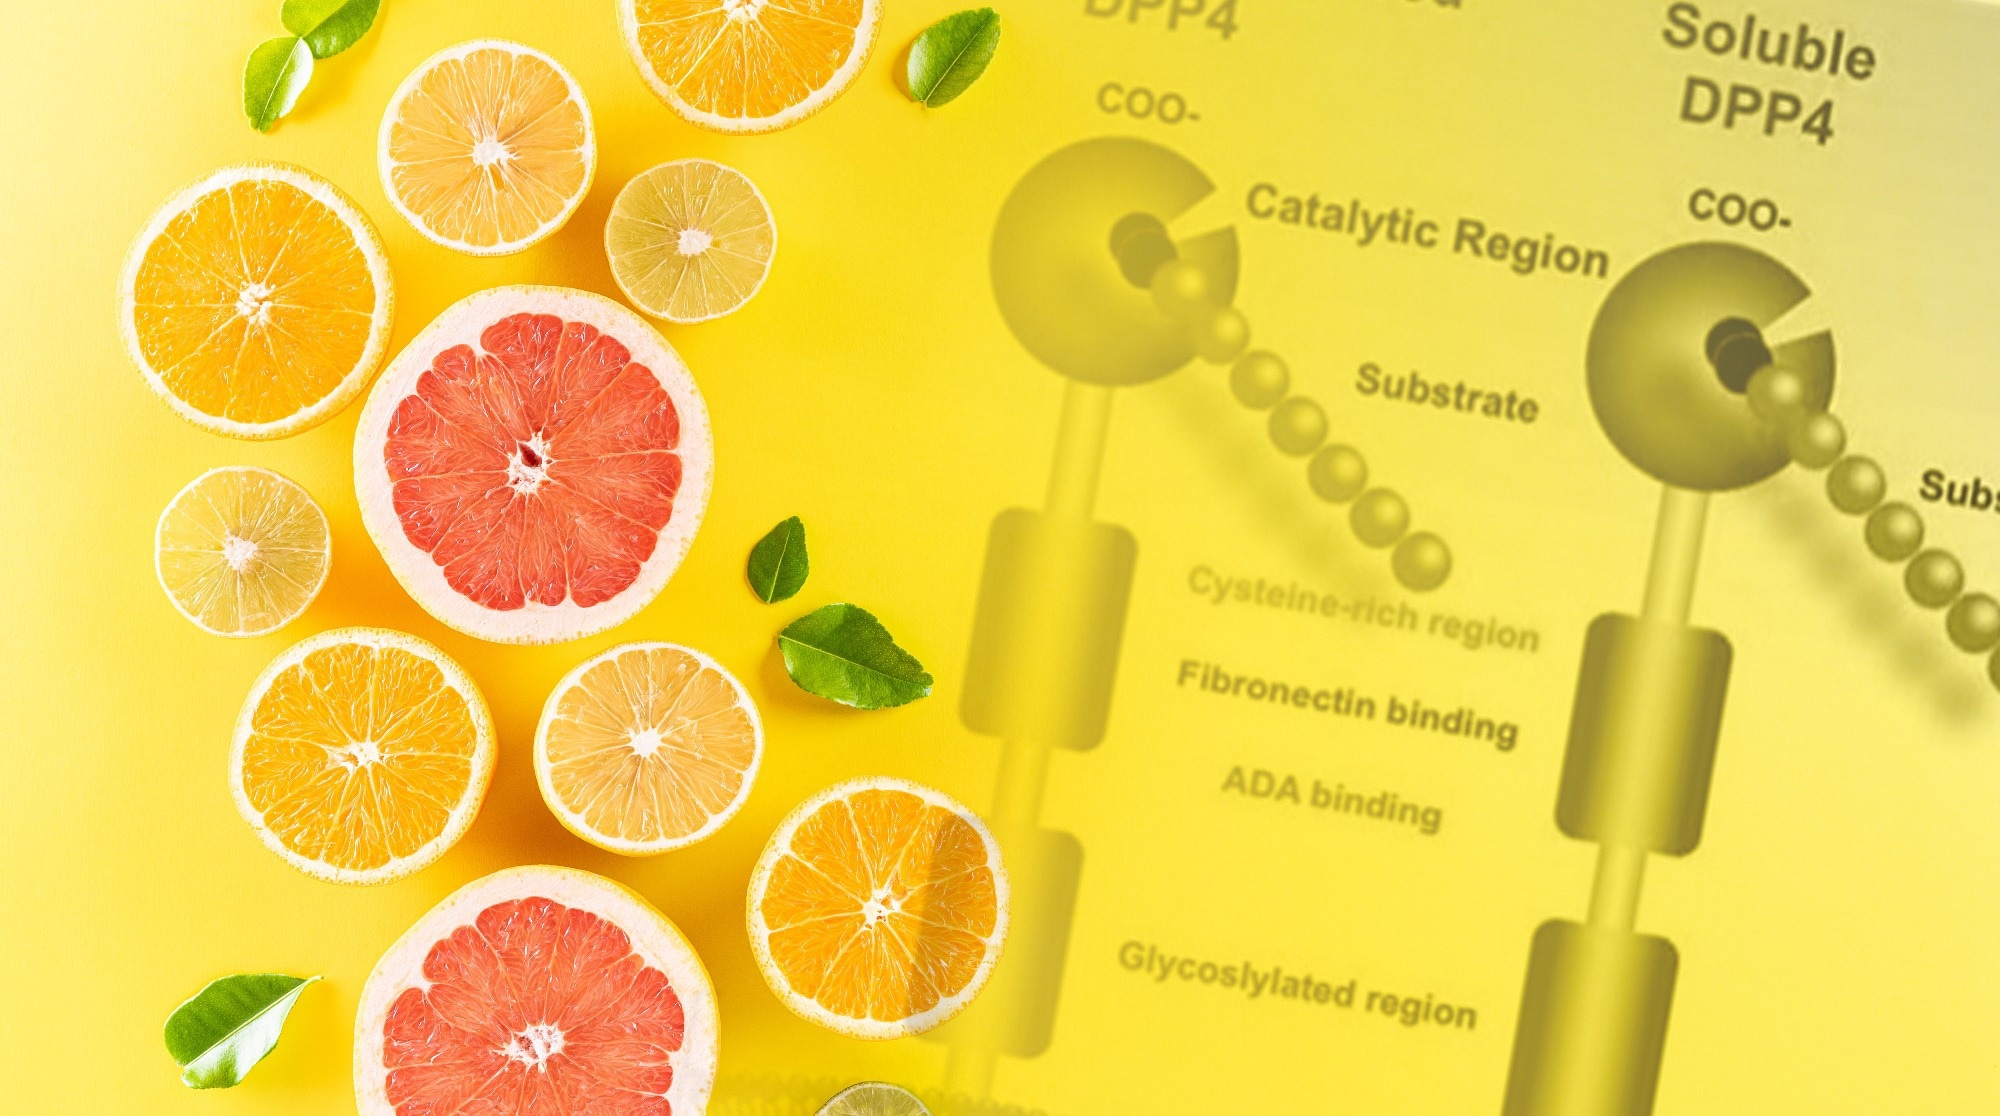 Study: A systematic review exploring the mechanisms by which citrus bioflavonoid supplementation benefits blood glucose levels and metabolic complications in type 2 diabetes mellitus. Image Credit: siam.pukkato / Shutterstock